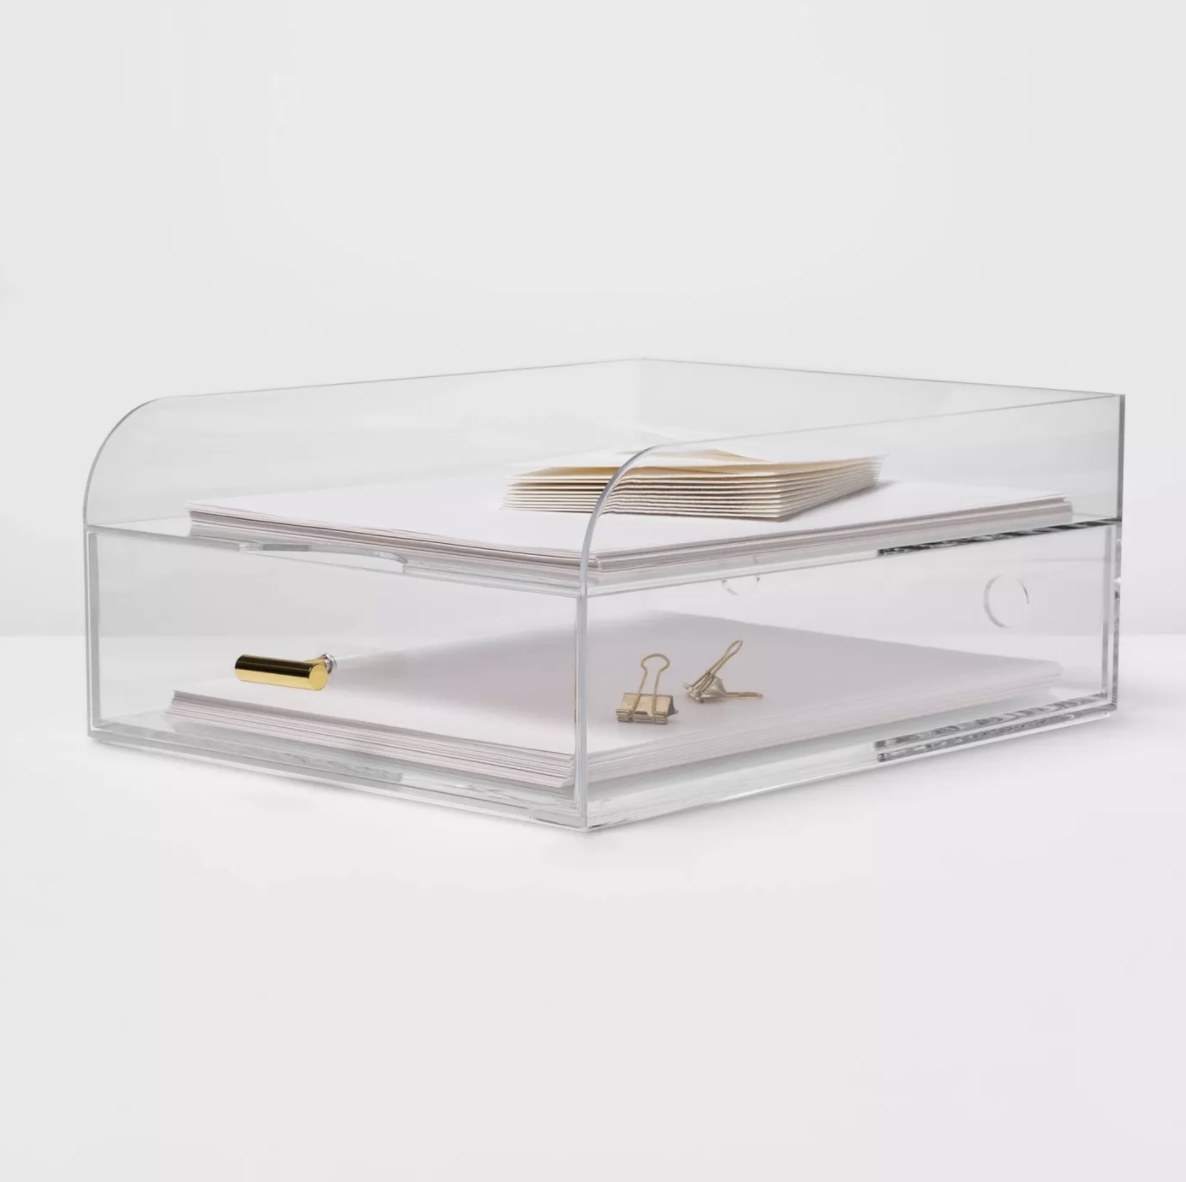 The clear tray has white paper and gold clips in the drawer and the top tray has white paper and envelopes